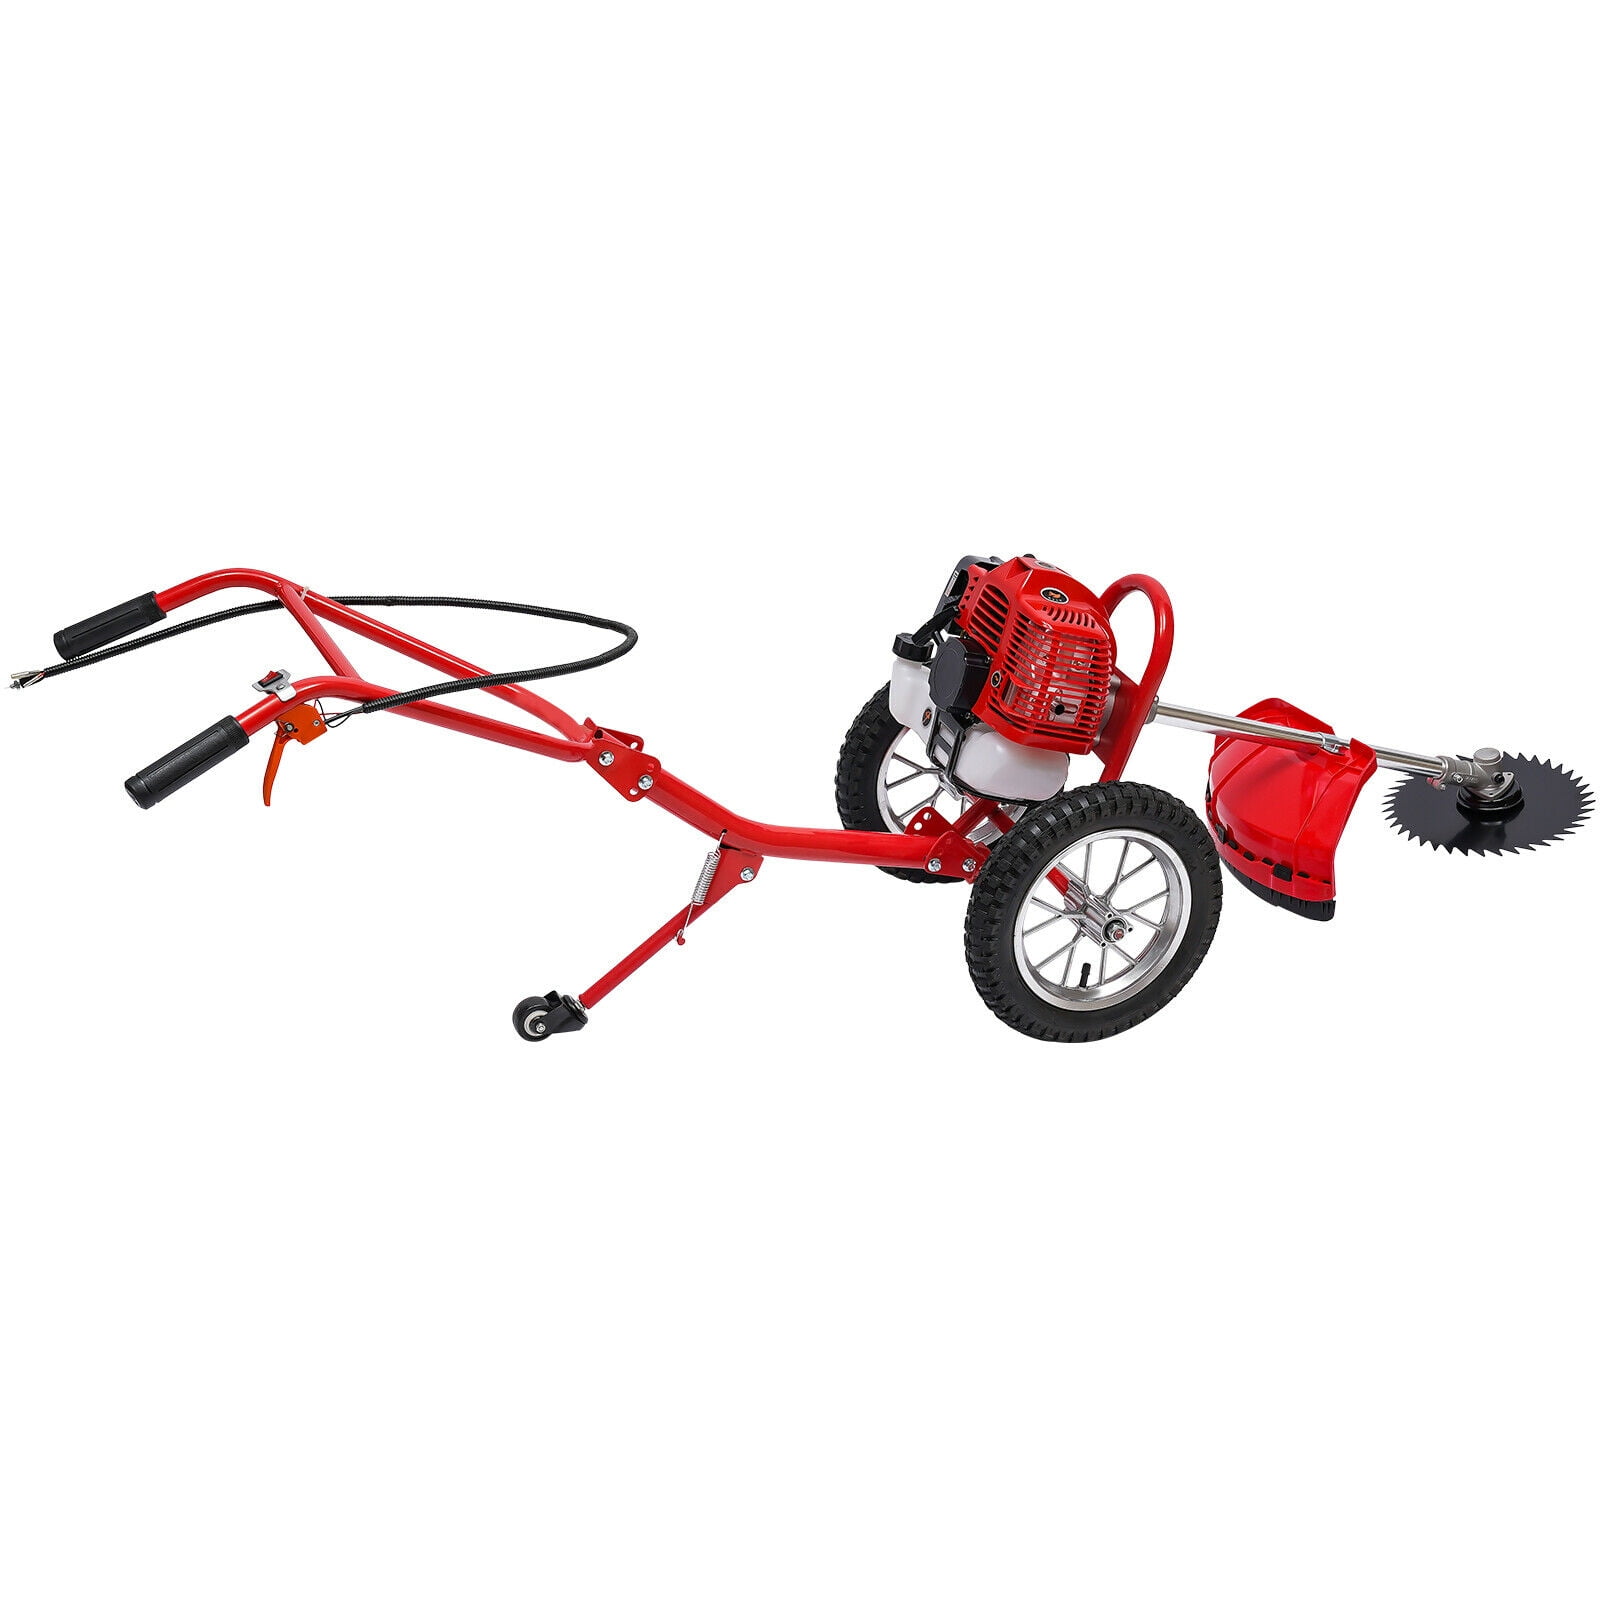 Oukaning 16-Inch 5-Blade Cordless Manual Reel Lawn Mower